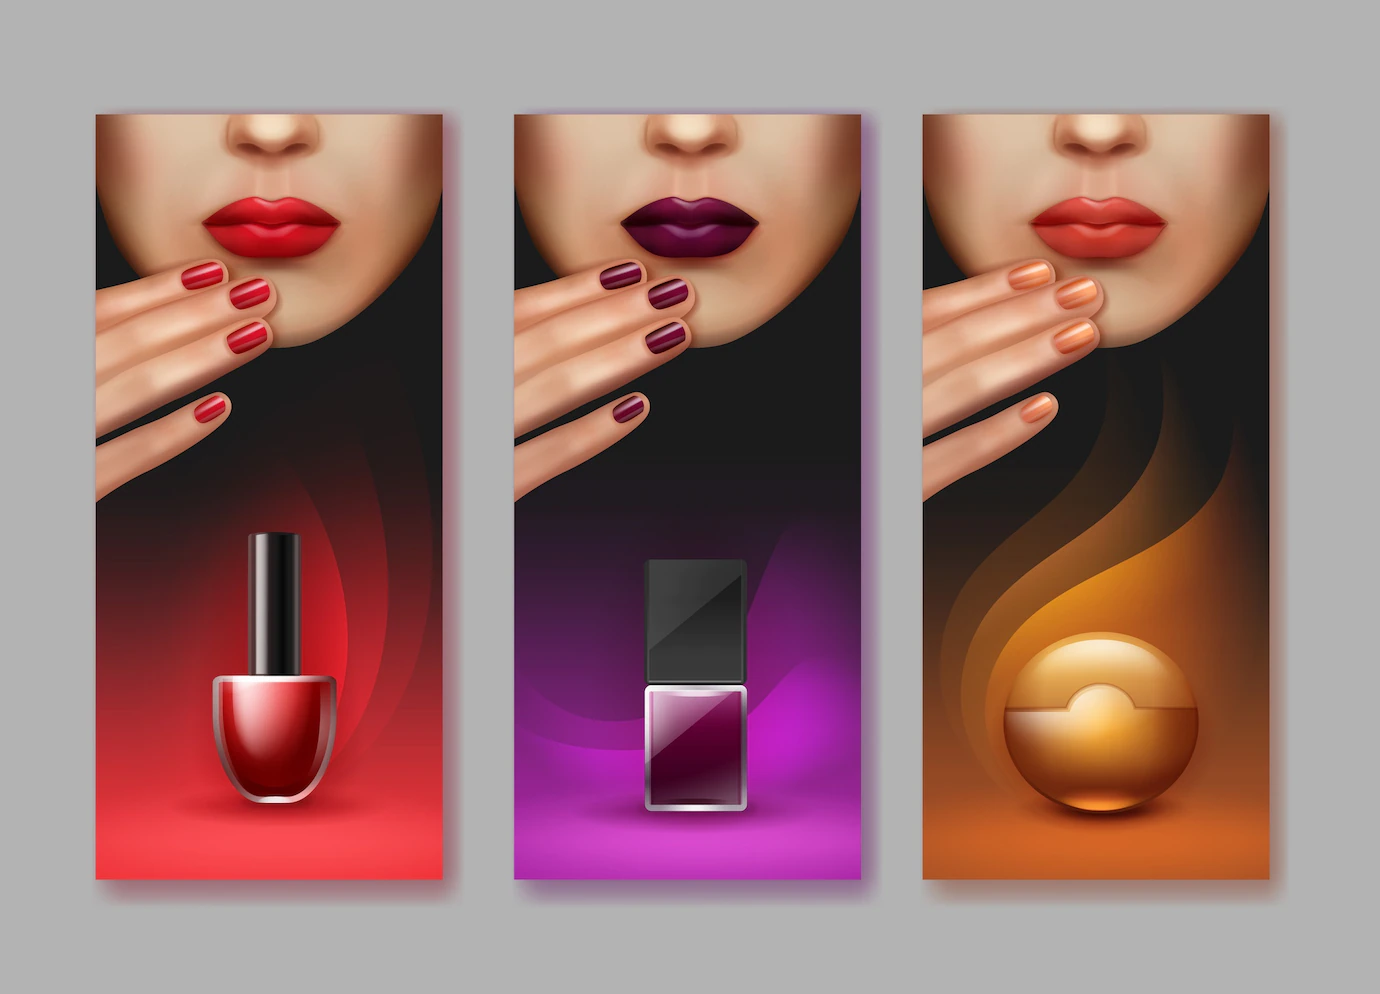 Brochure Makeup With Nail Polish Different Colors 1284 45591